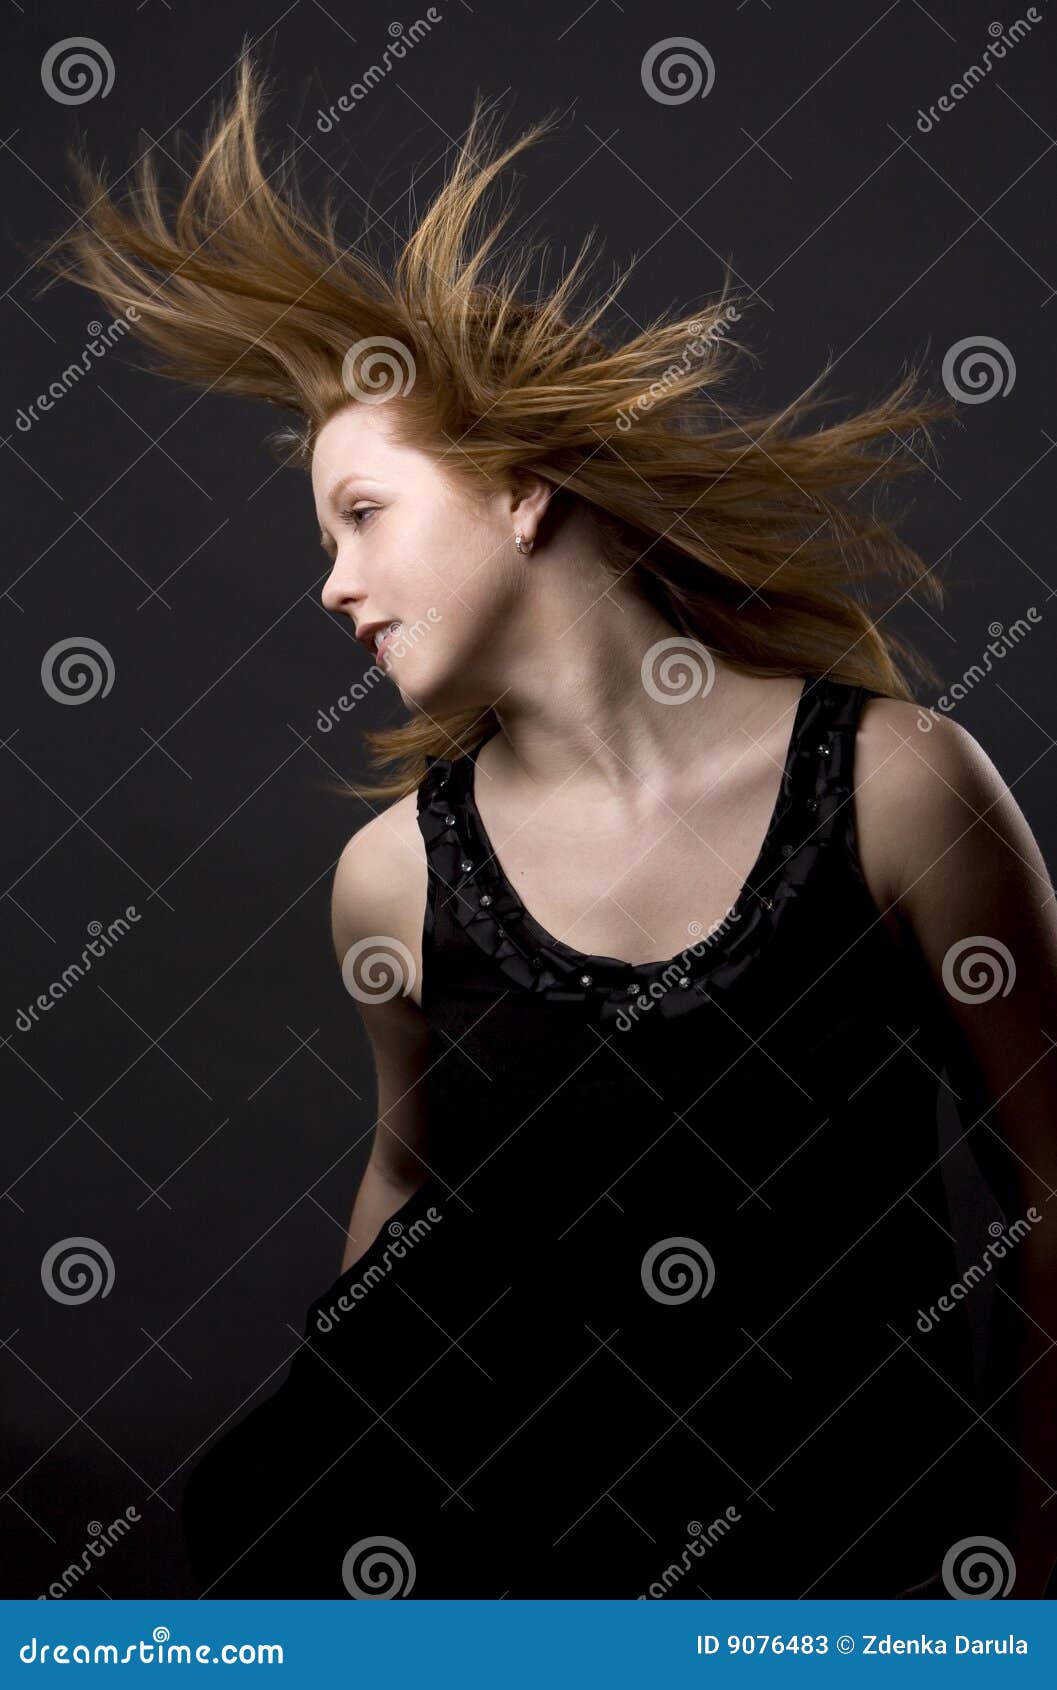 Hair and wind stock image. Image of human, woman, pretty - 9076483